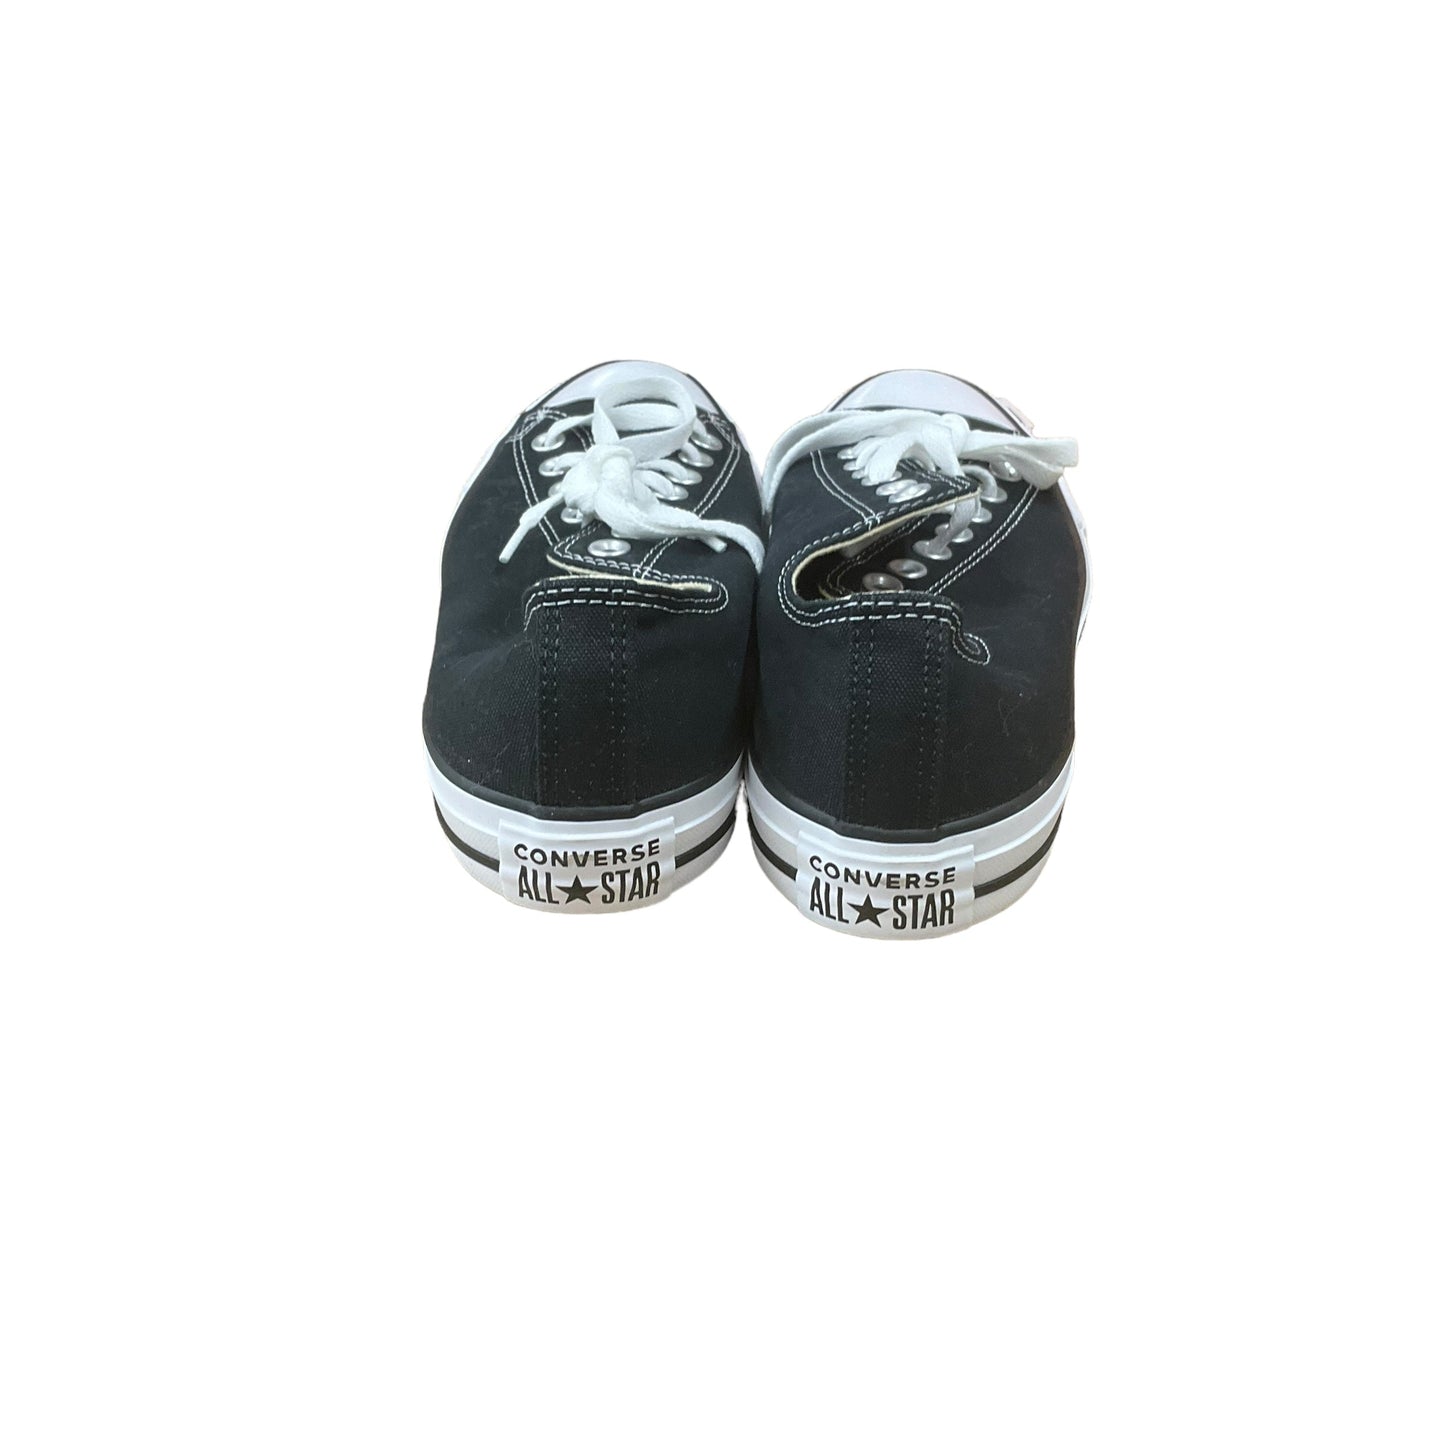 Black Shoes Sneakers Converse, Size 8.5